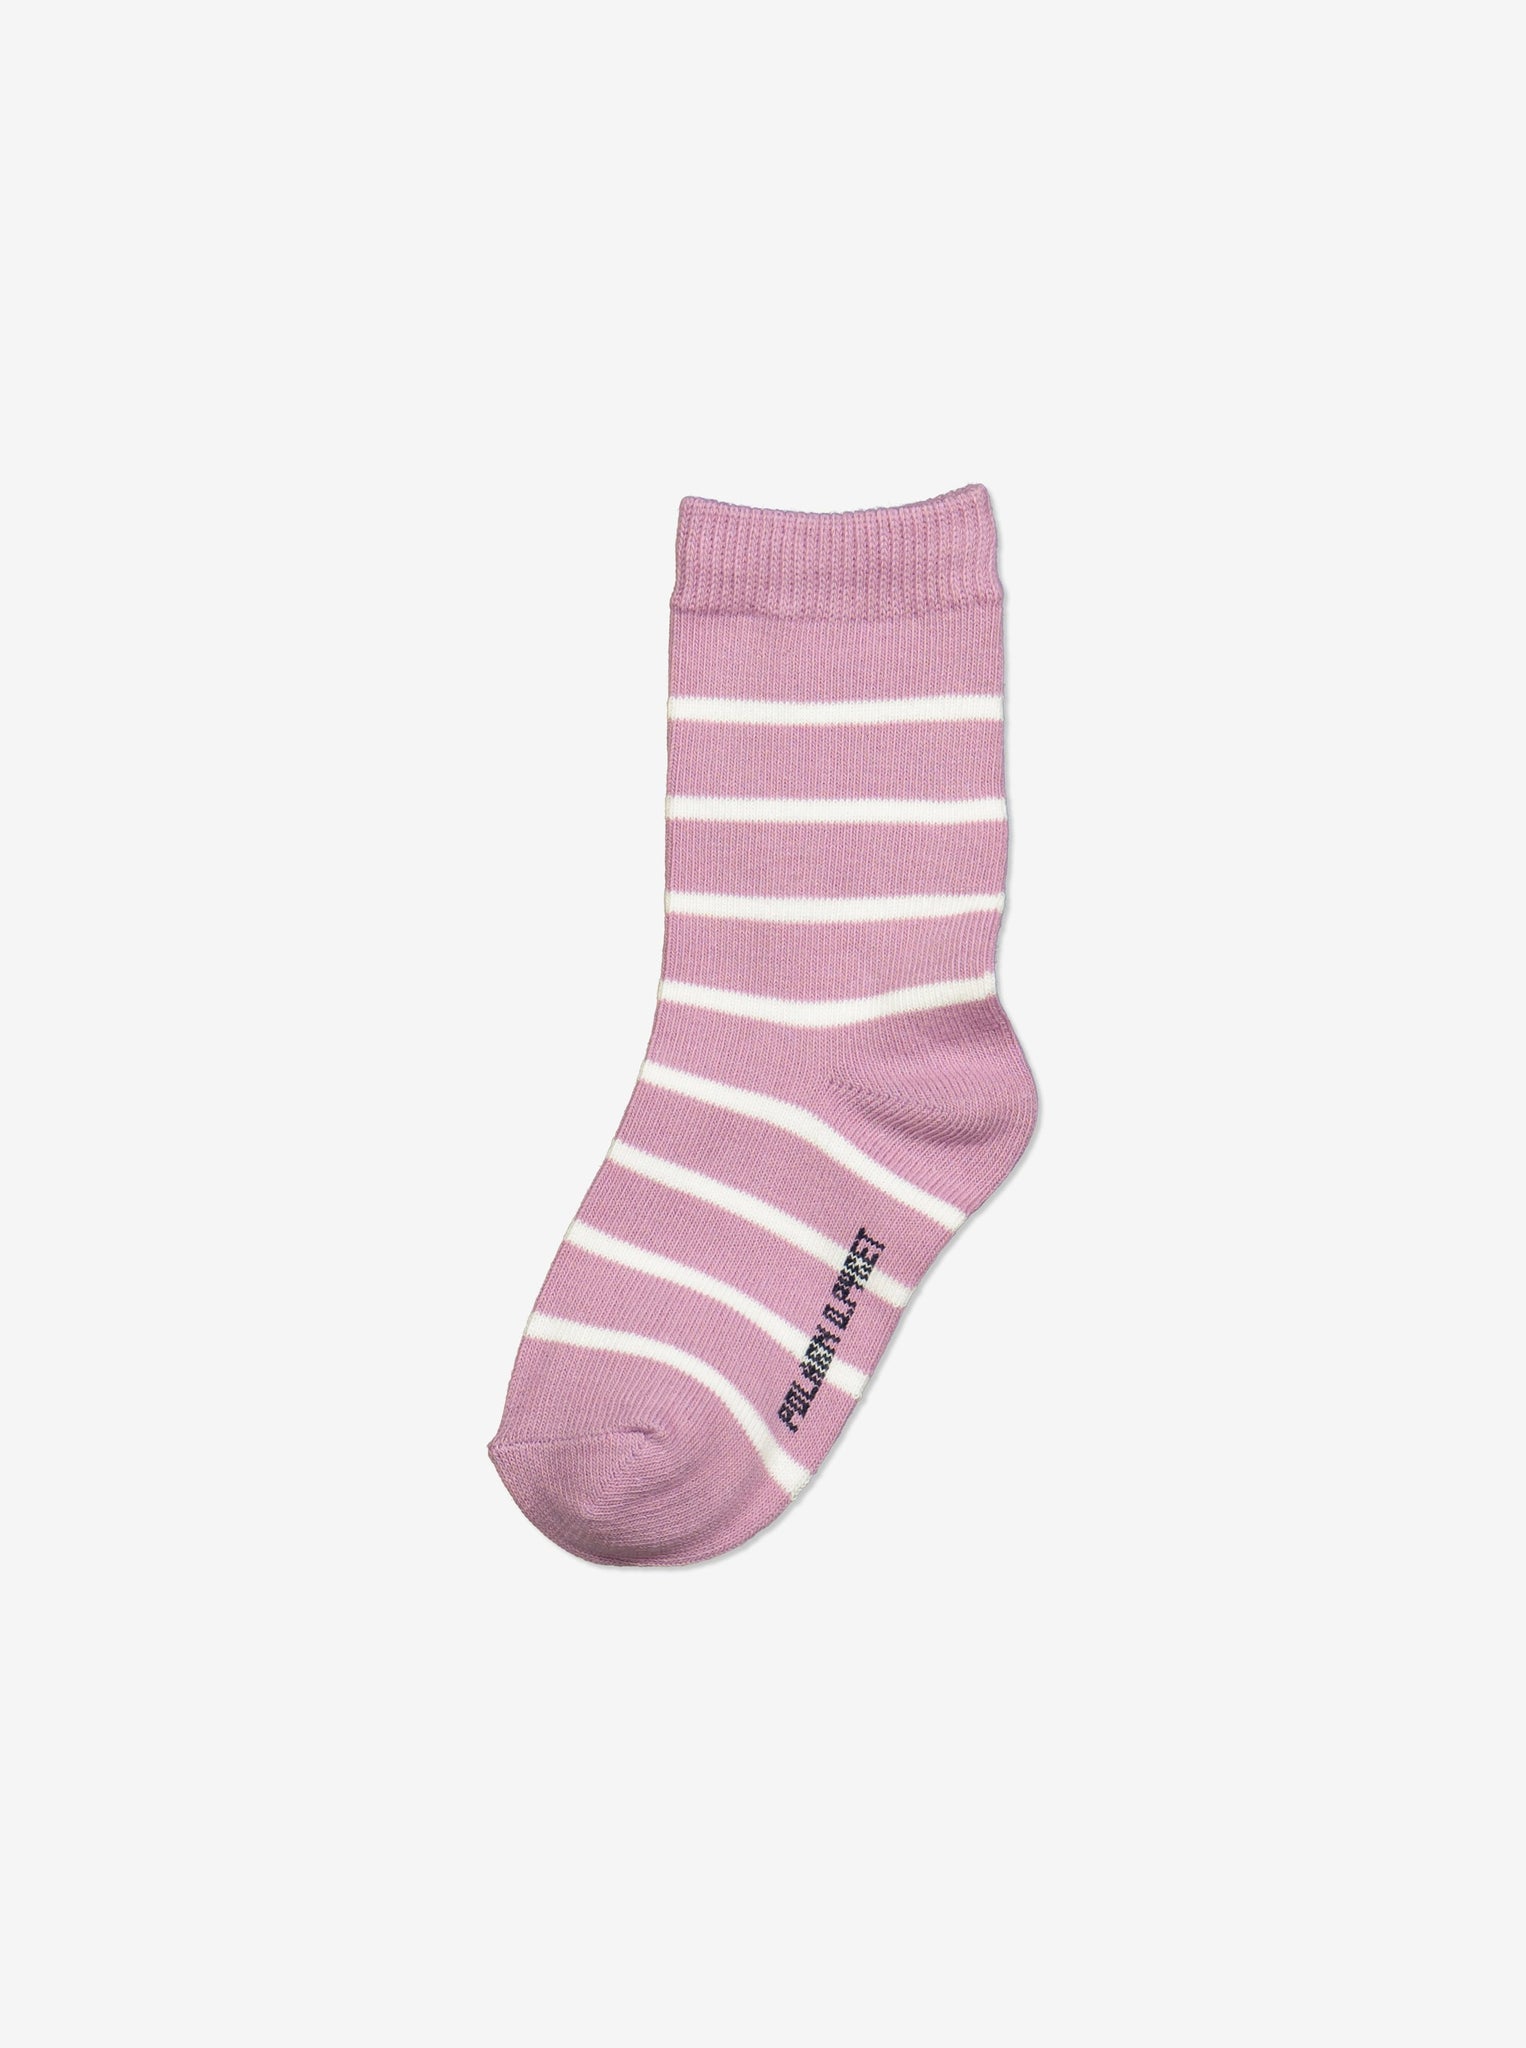  Organic Pink Kids Socks Multipack from Polarn O. Pyret Kidswear. Made from sustainably sourced materials.